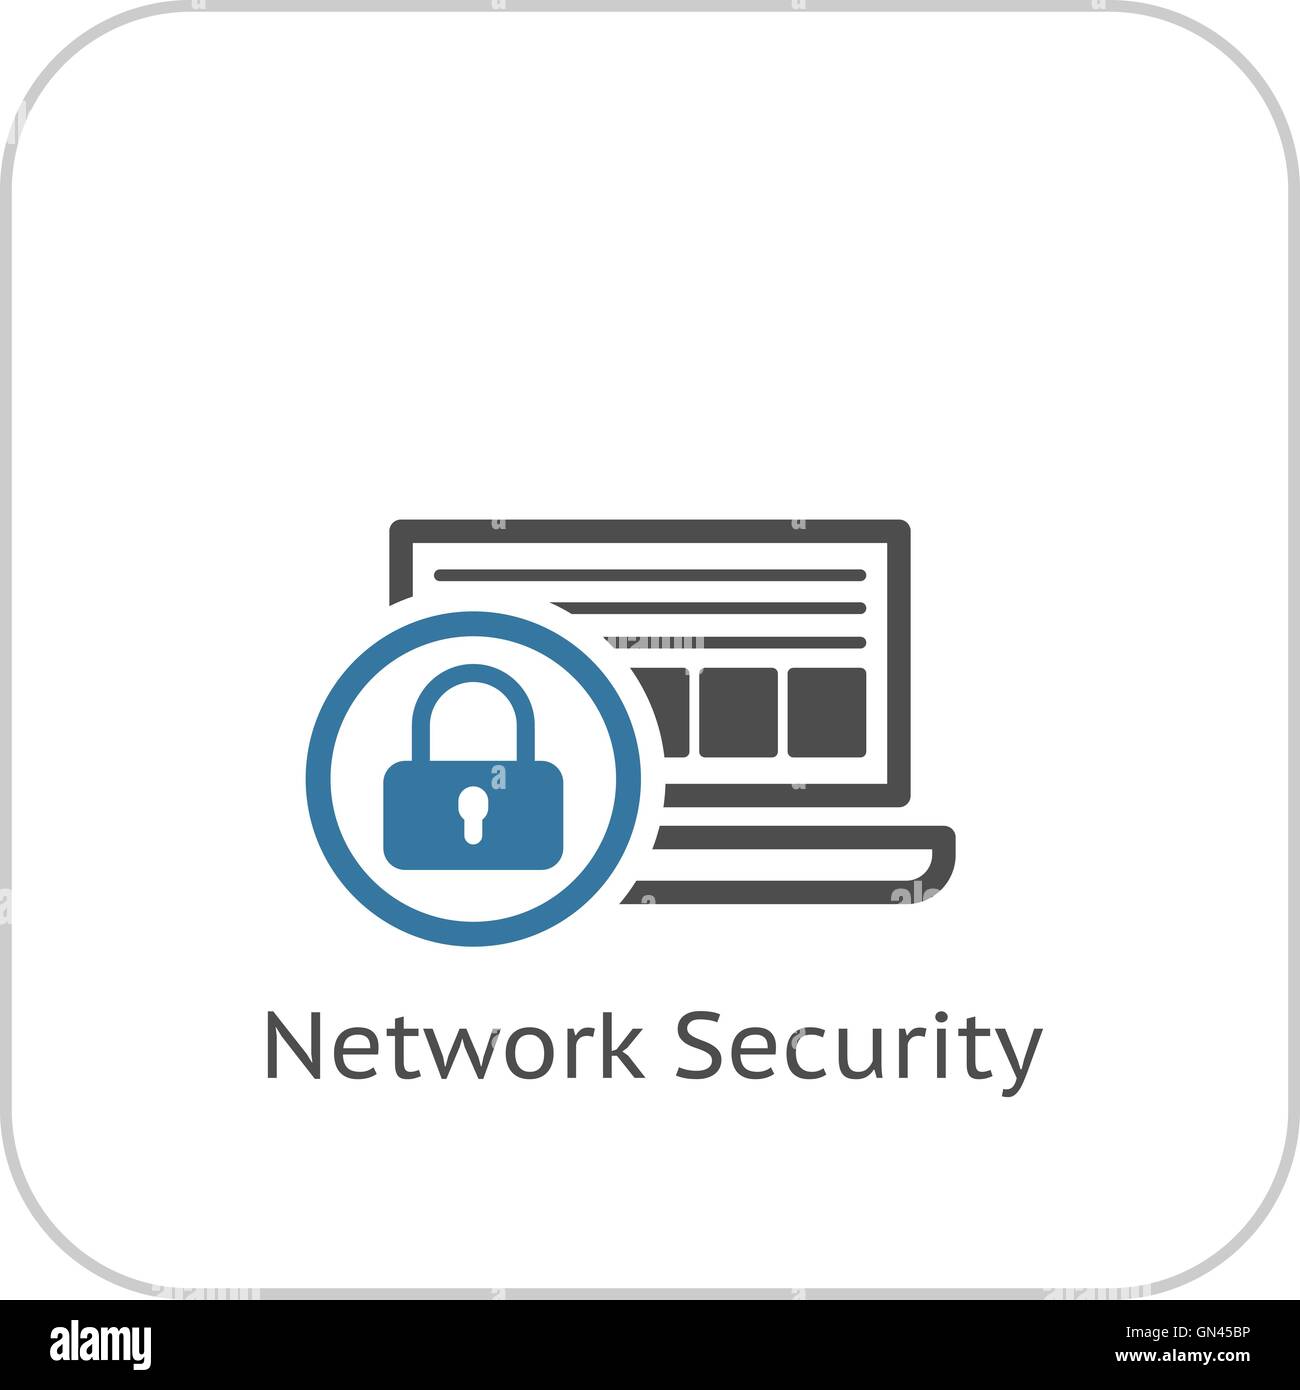 Network Security Icon. Flat Design. Stock Vector